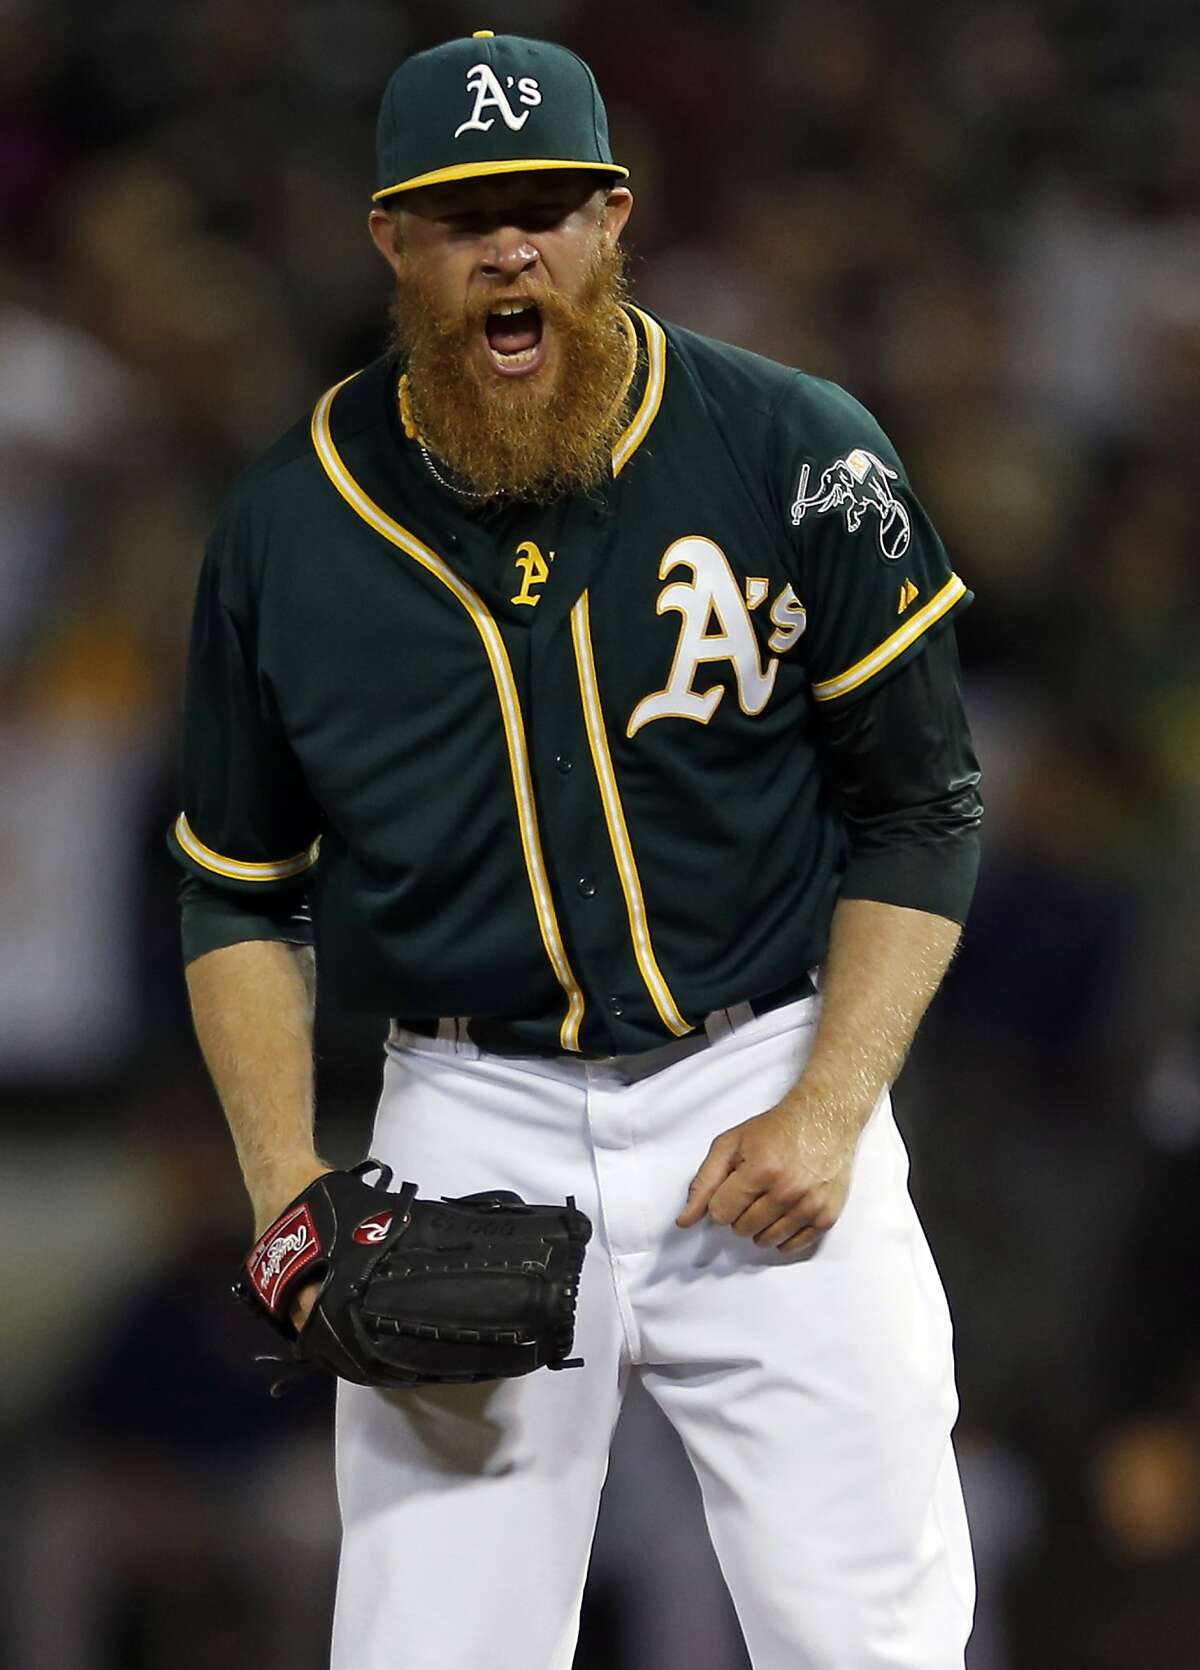 Oakland Athletics' relief pitcher Sean Doolittle reacts to the final out of the A's 9-7 win over the Houston Astros during MLB game at O.co Coliseum in Oakland, Calif. on Wednesday, July 23, 2014.